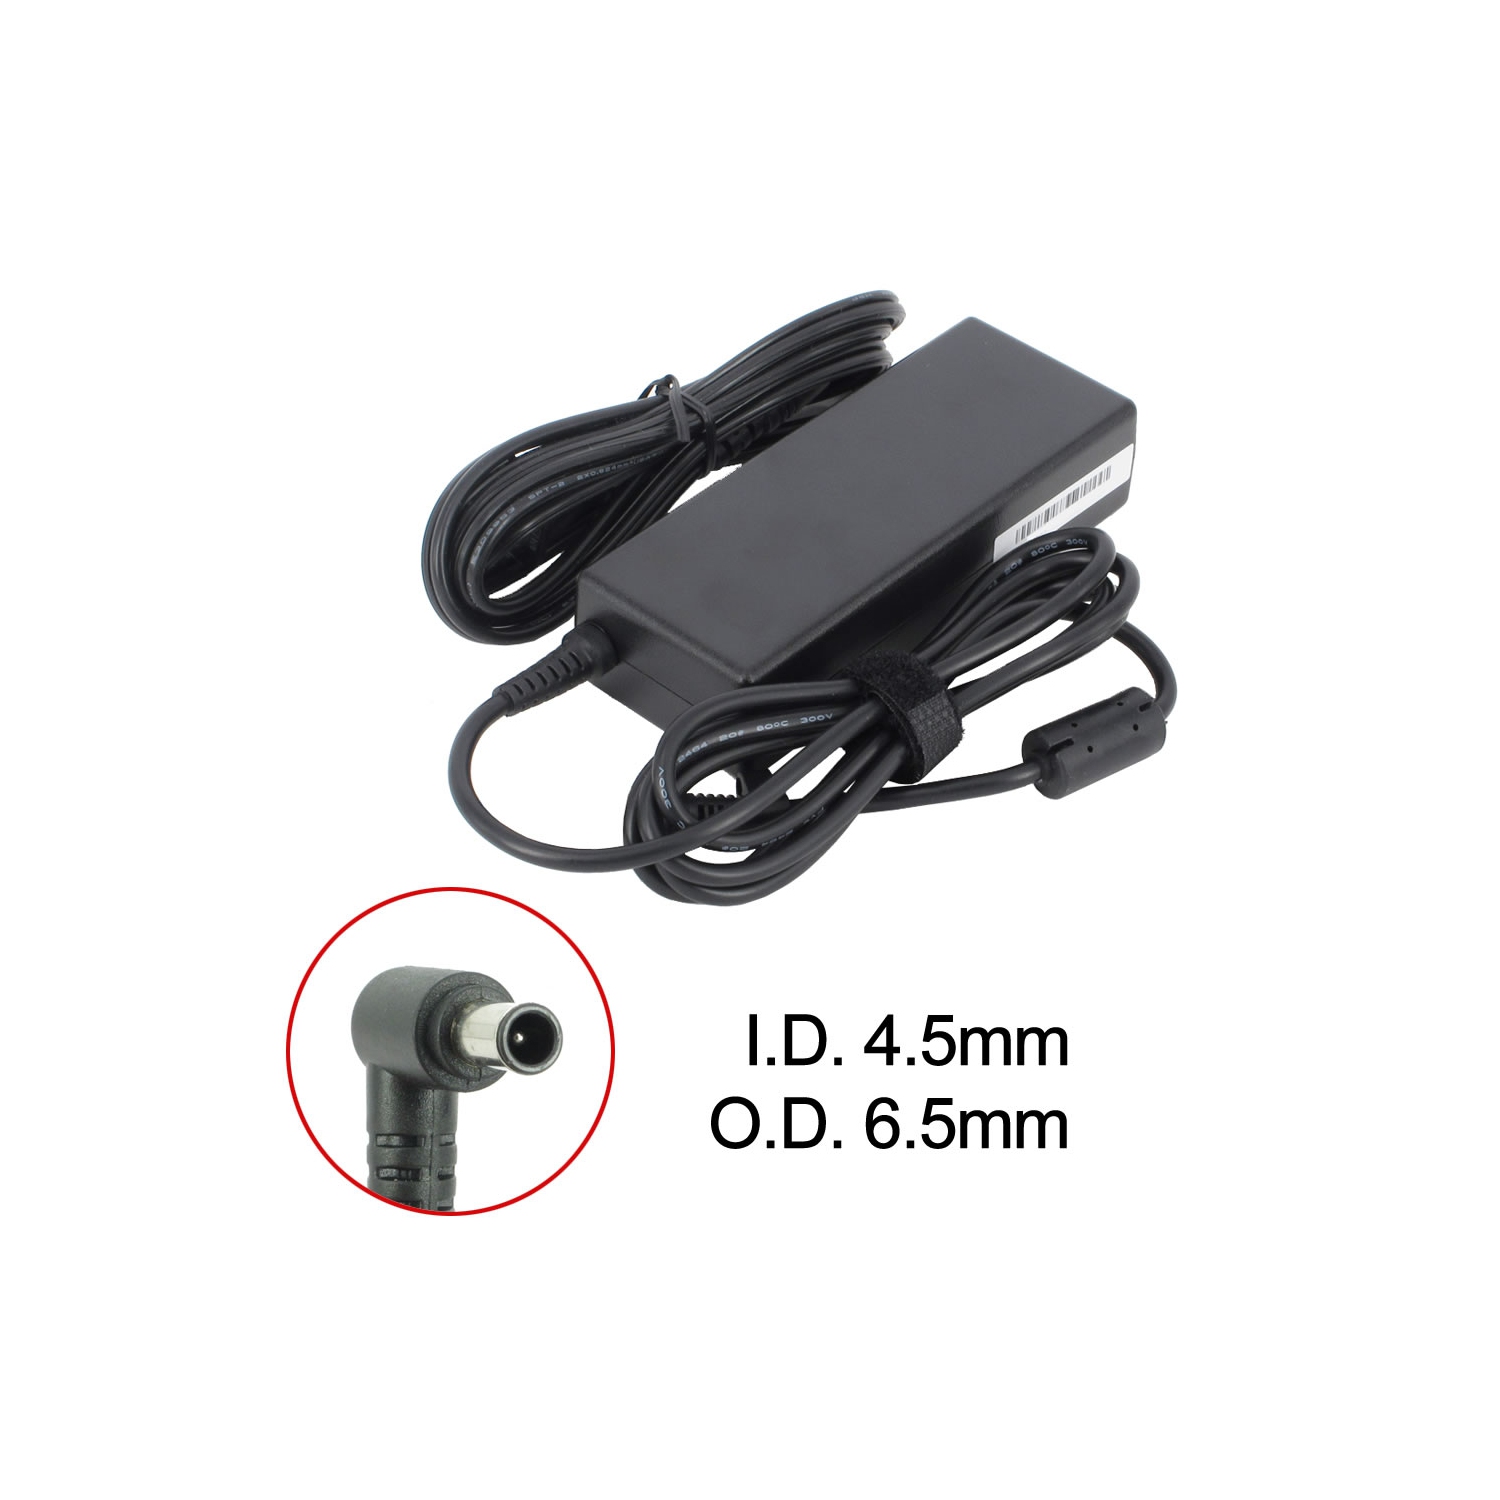 Brand New Laptop AC Adapter for LG XNOTE T280, ADP-90TH A, PCGA-AC19V19, VGP-AC19V14, VGP-AC19V26, VGP-AC19V43